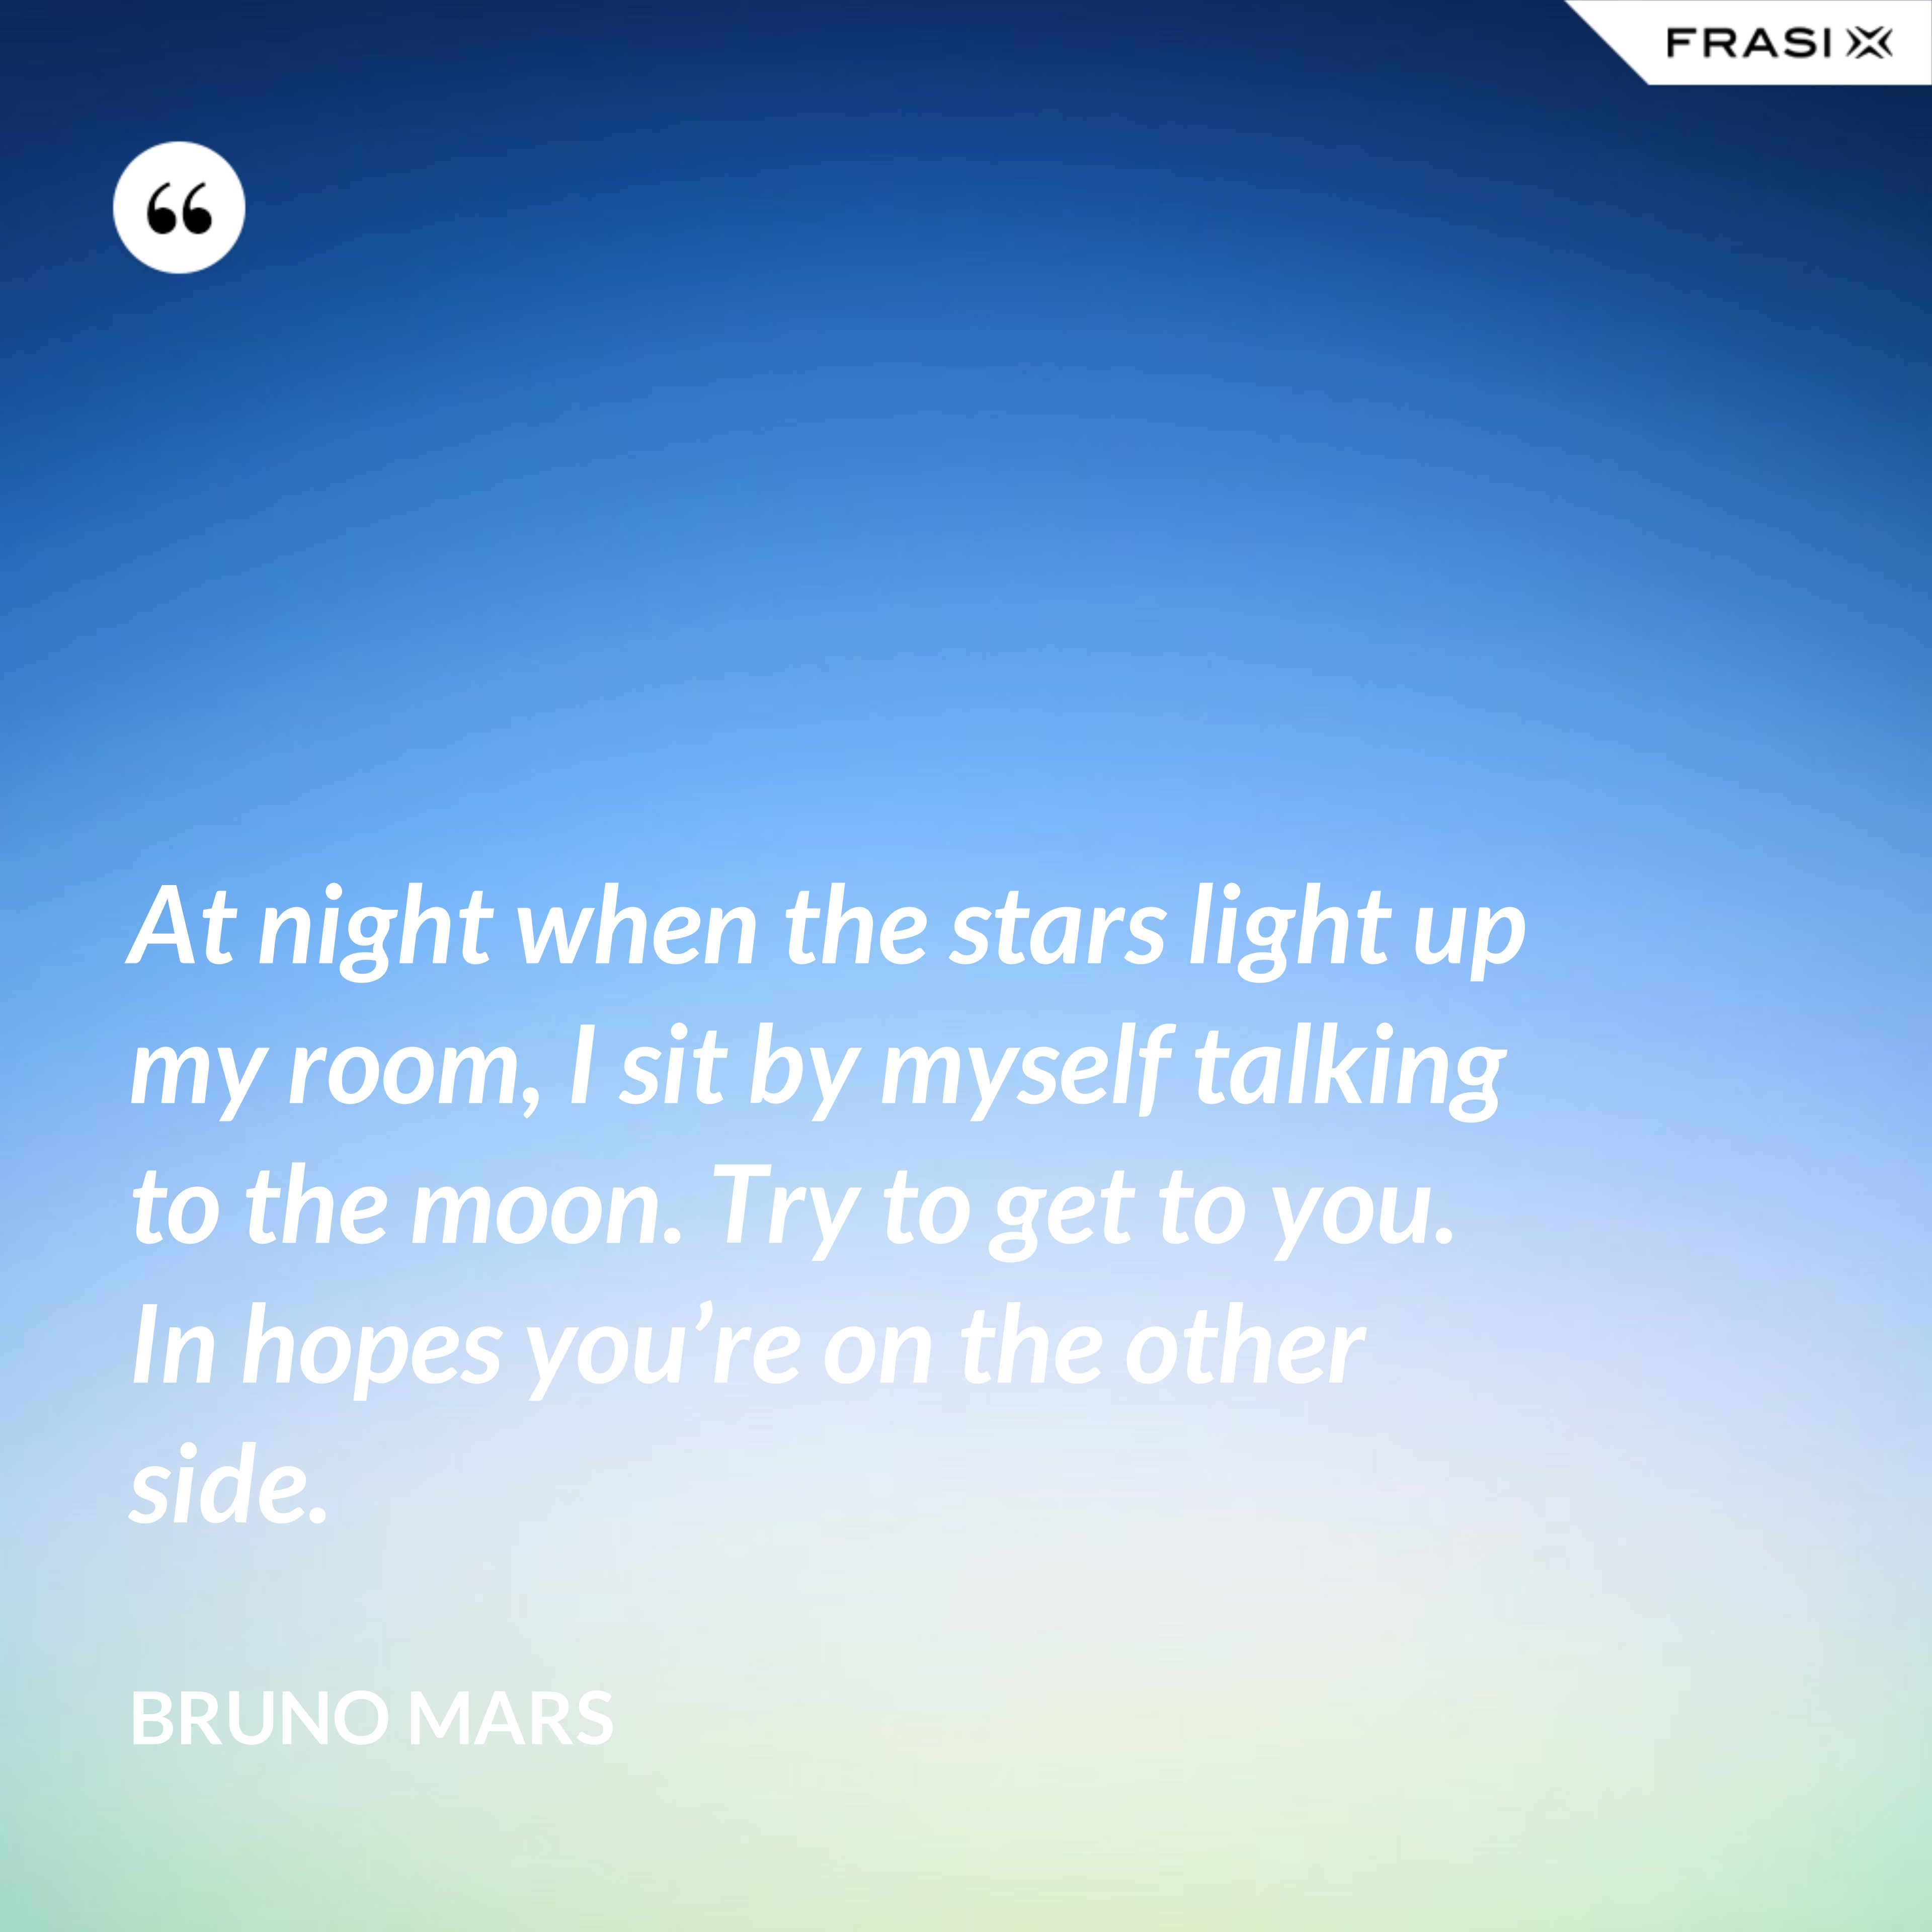 At night when the stars light up my room, I sit by myself talking to the moon. Try to get to you. In hopes you’re on the other side. - Bruno Mars